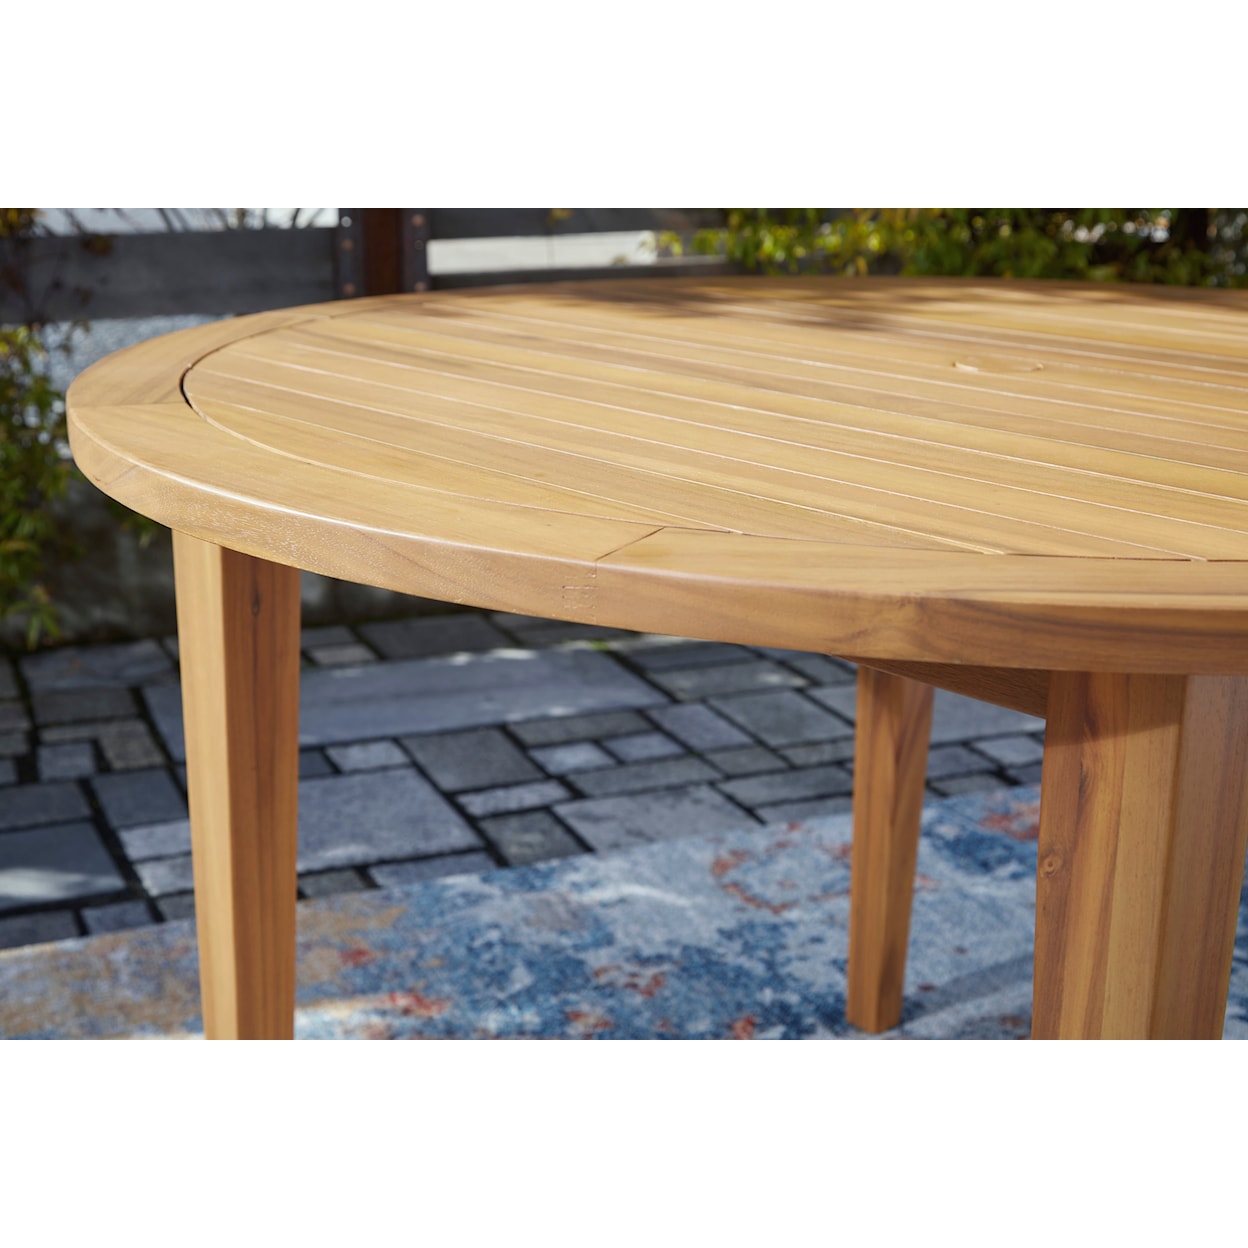 Ashley Furniture Signature Design Janiyah Outdoor Dining Table